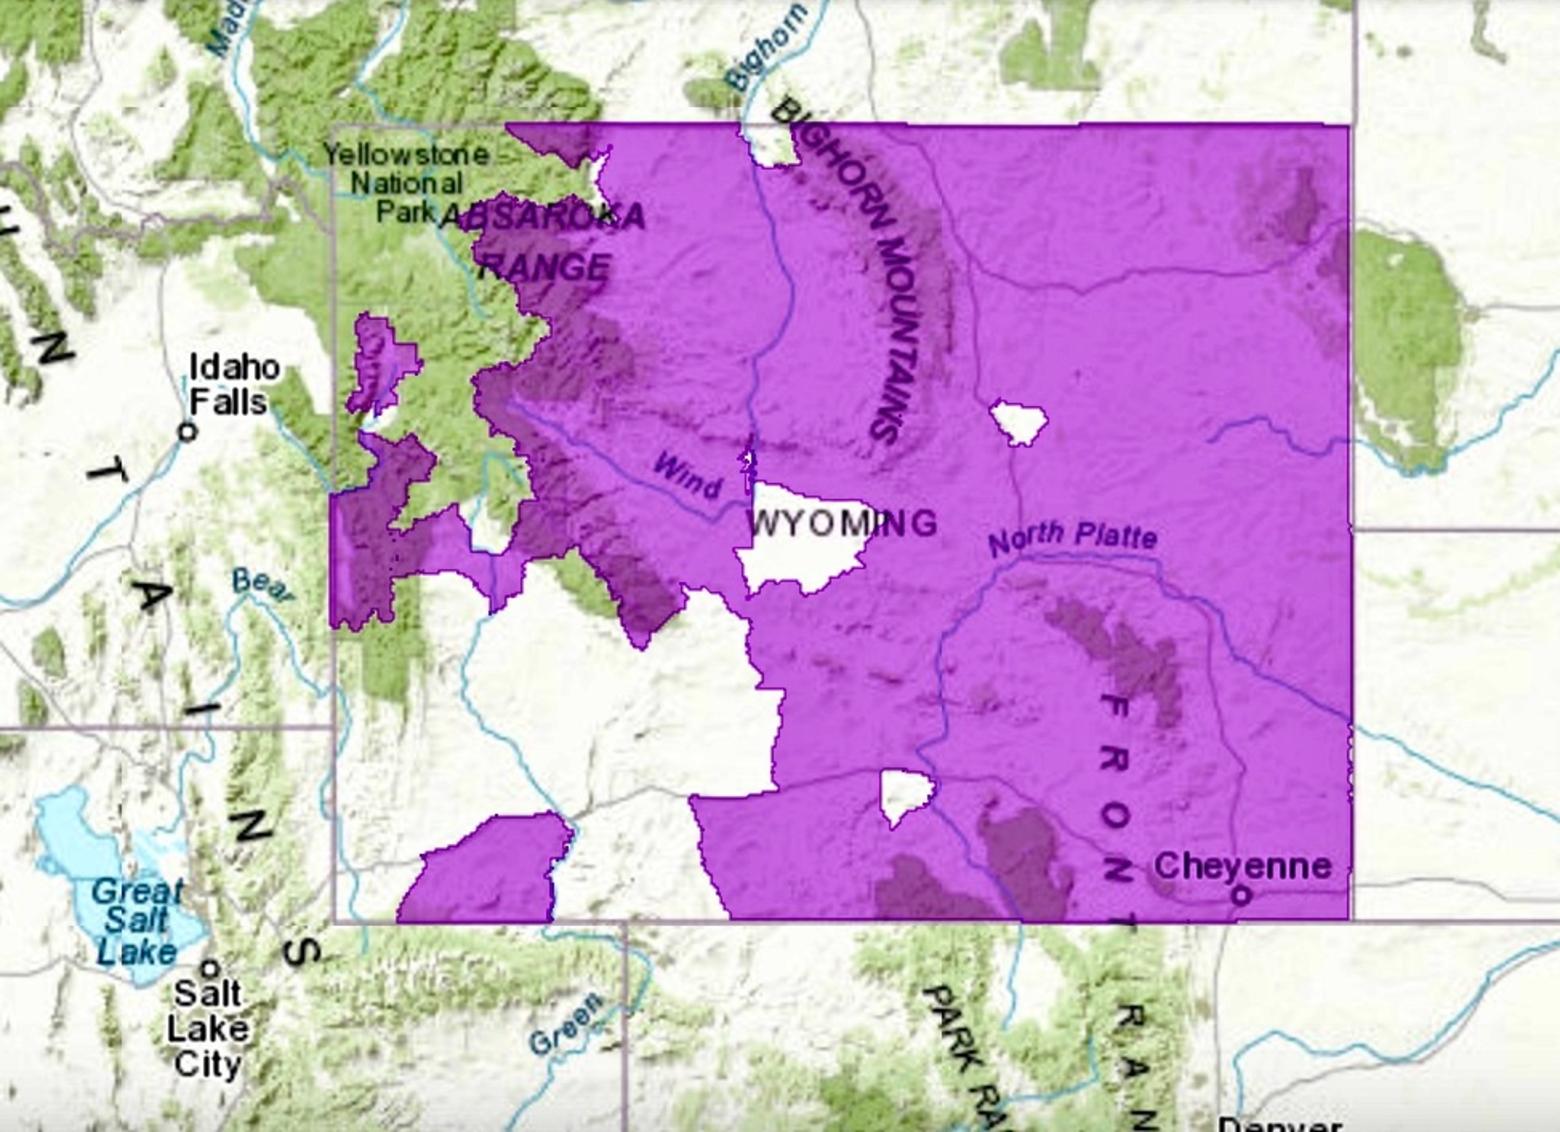 The area in purple shows where CWD is present in Wyoming deer, elk and moose, some of which migrate hundreds of miles. Note the upper lefthand corner which has Yellowstone and Grand Teton national parks that represent places of convergence for vast herds, some of which might become infected with CWD if it reaches large wapiti concentrations on the National Elk Refuge. Graphic courtesy Wyoming Fish and Game